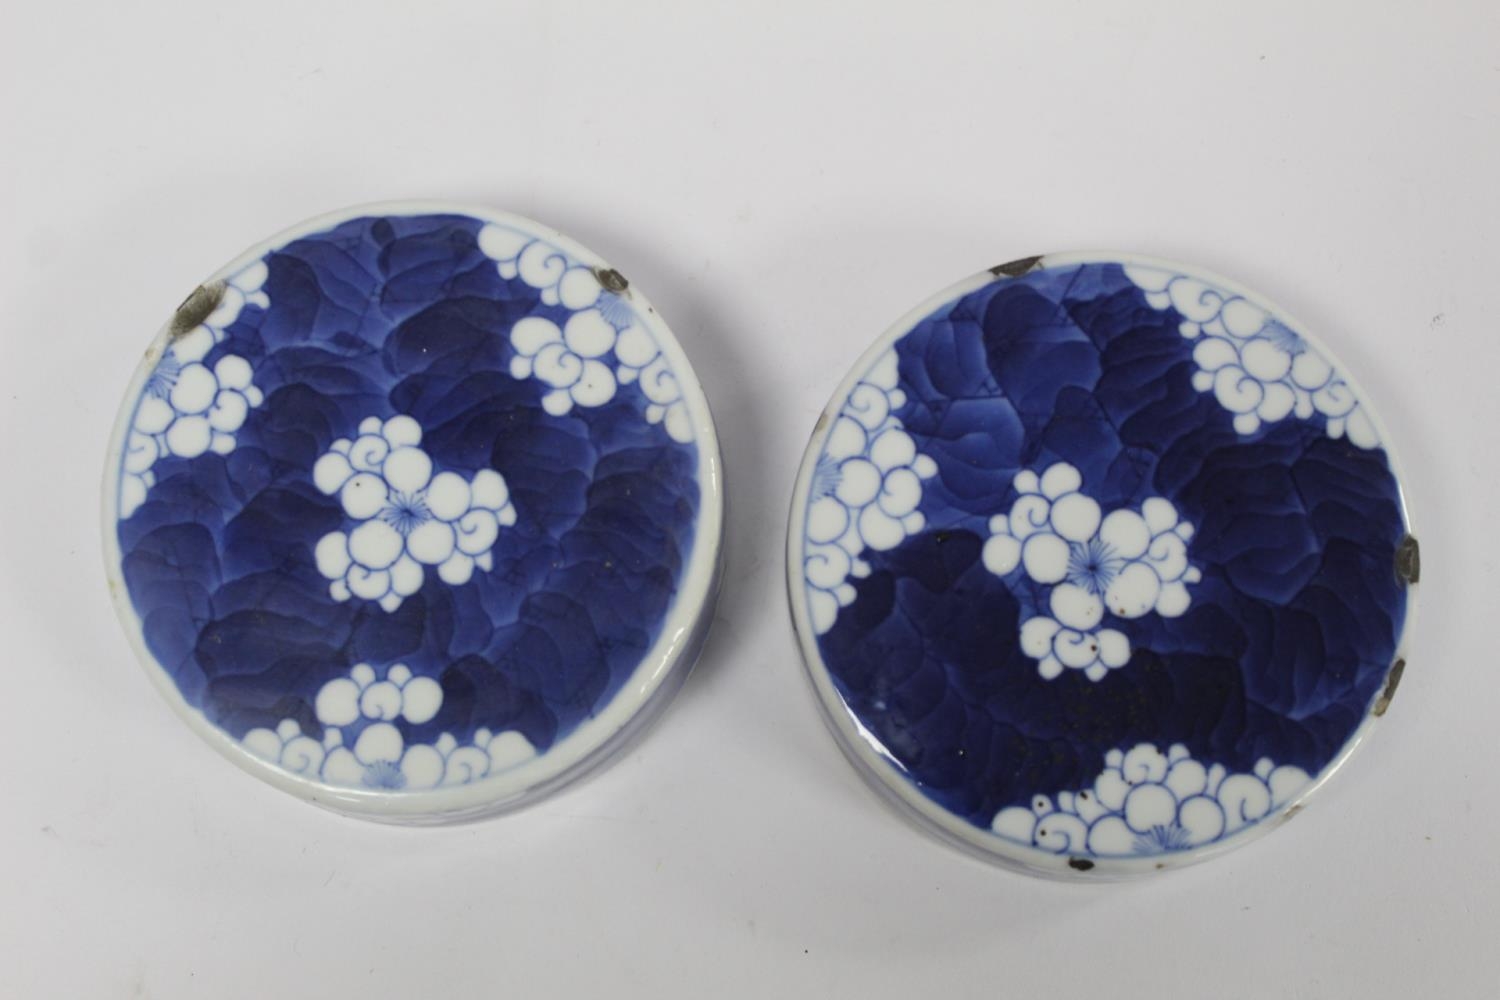 Pair of 19th century Chinese porcelain covered ginger jars of ovoid form with underglaze blue - Image 11 of 28